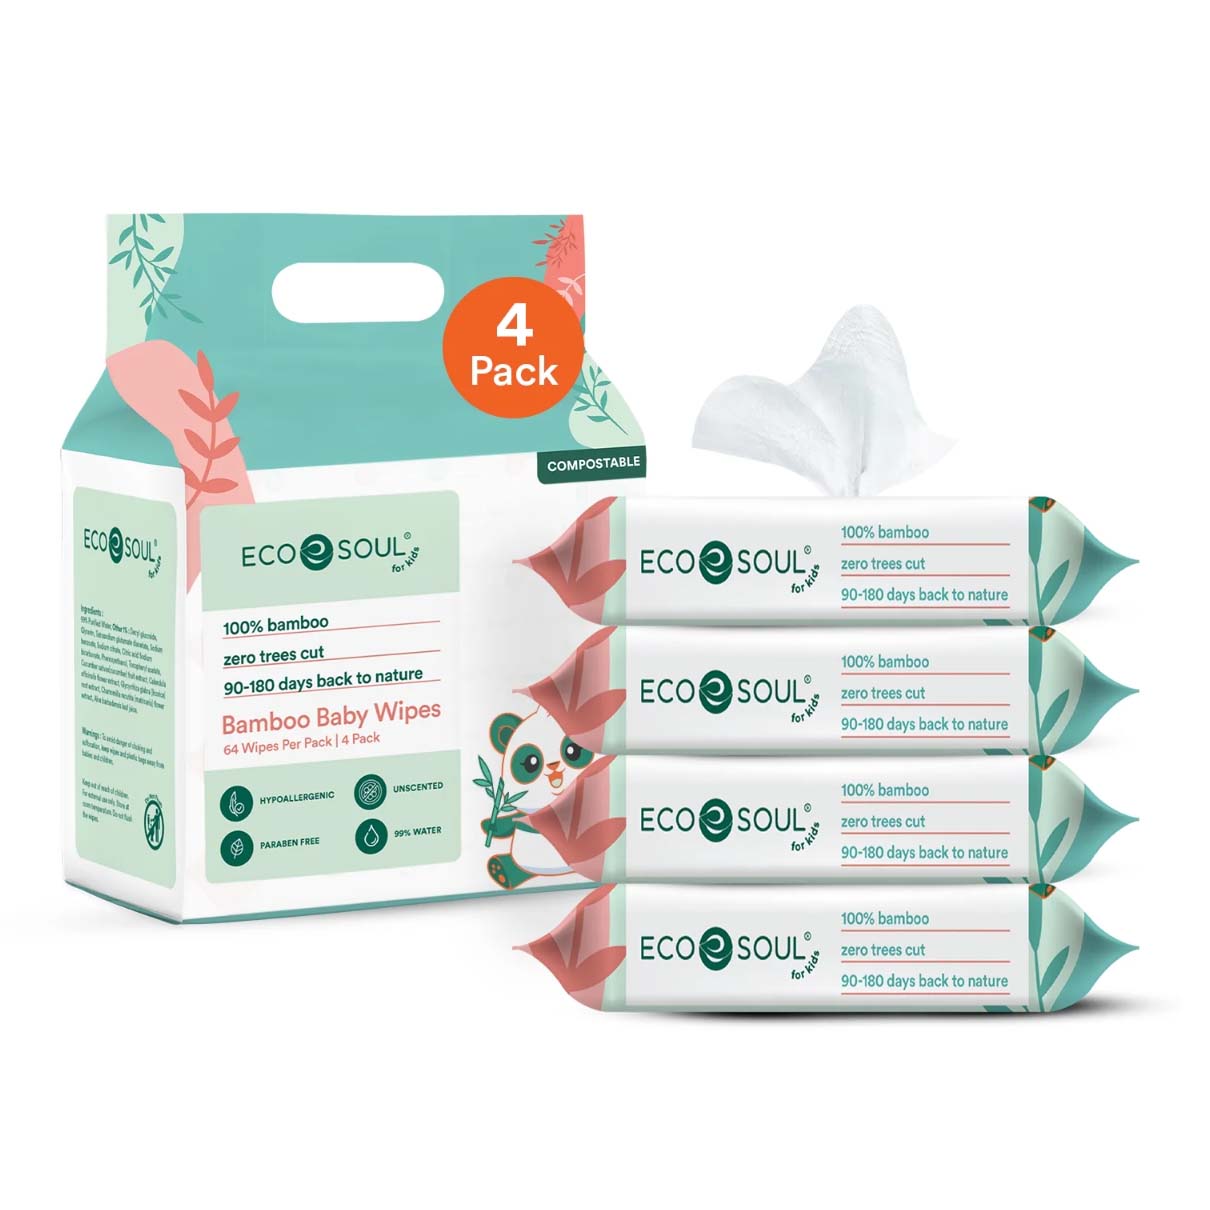 Stacks of Eco Soul baby wipes in white and green packaging